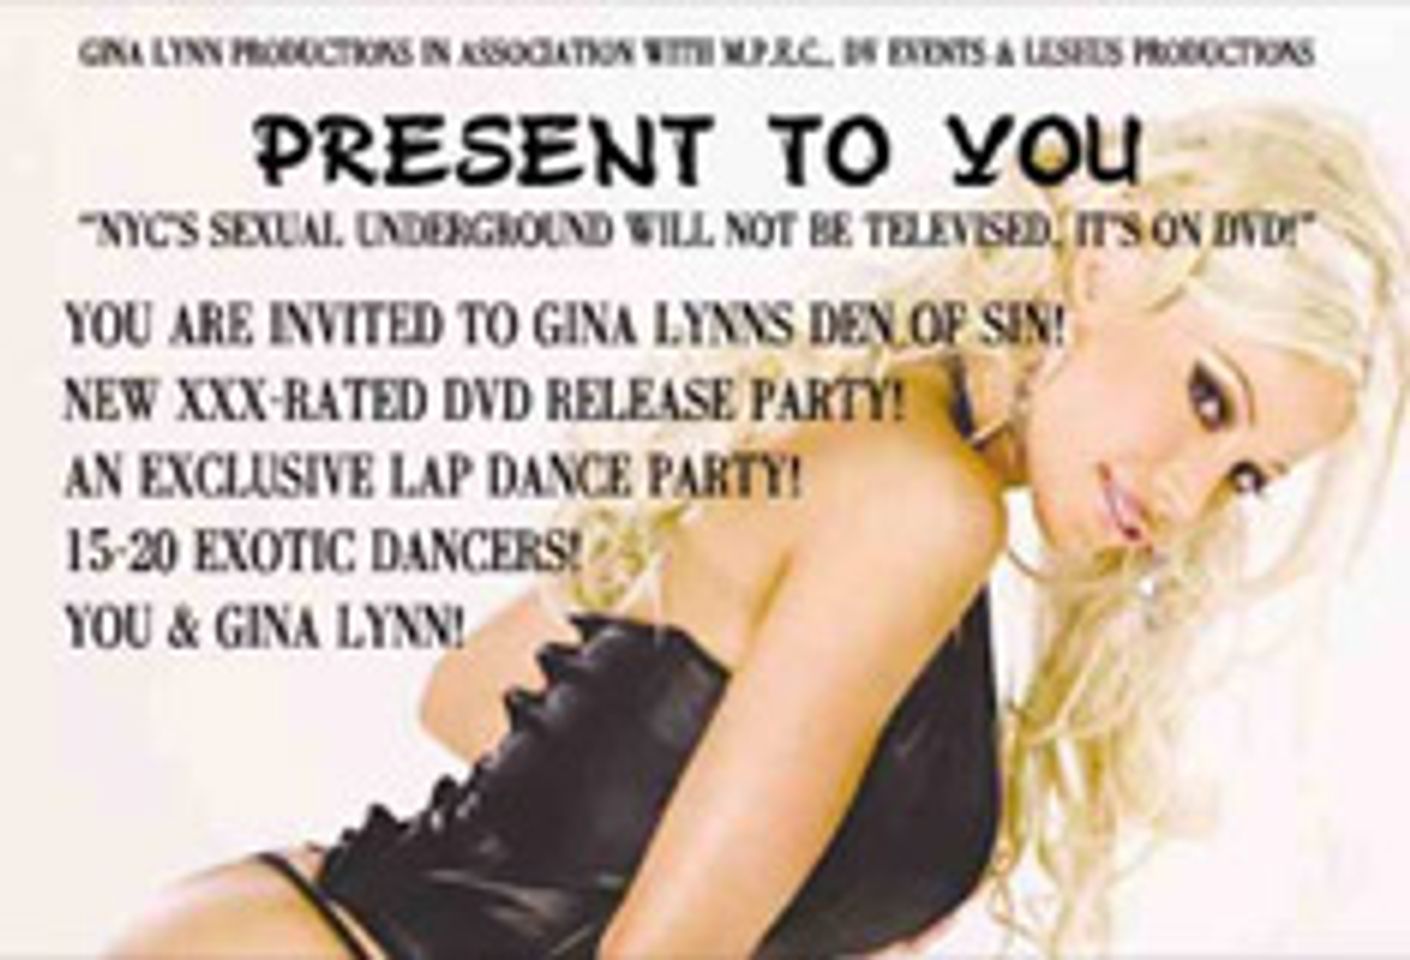 Gina Lynn to Host NYC Release Party